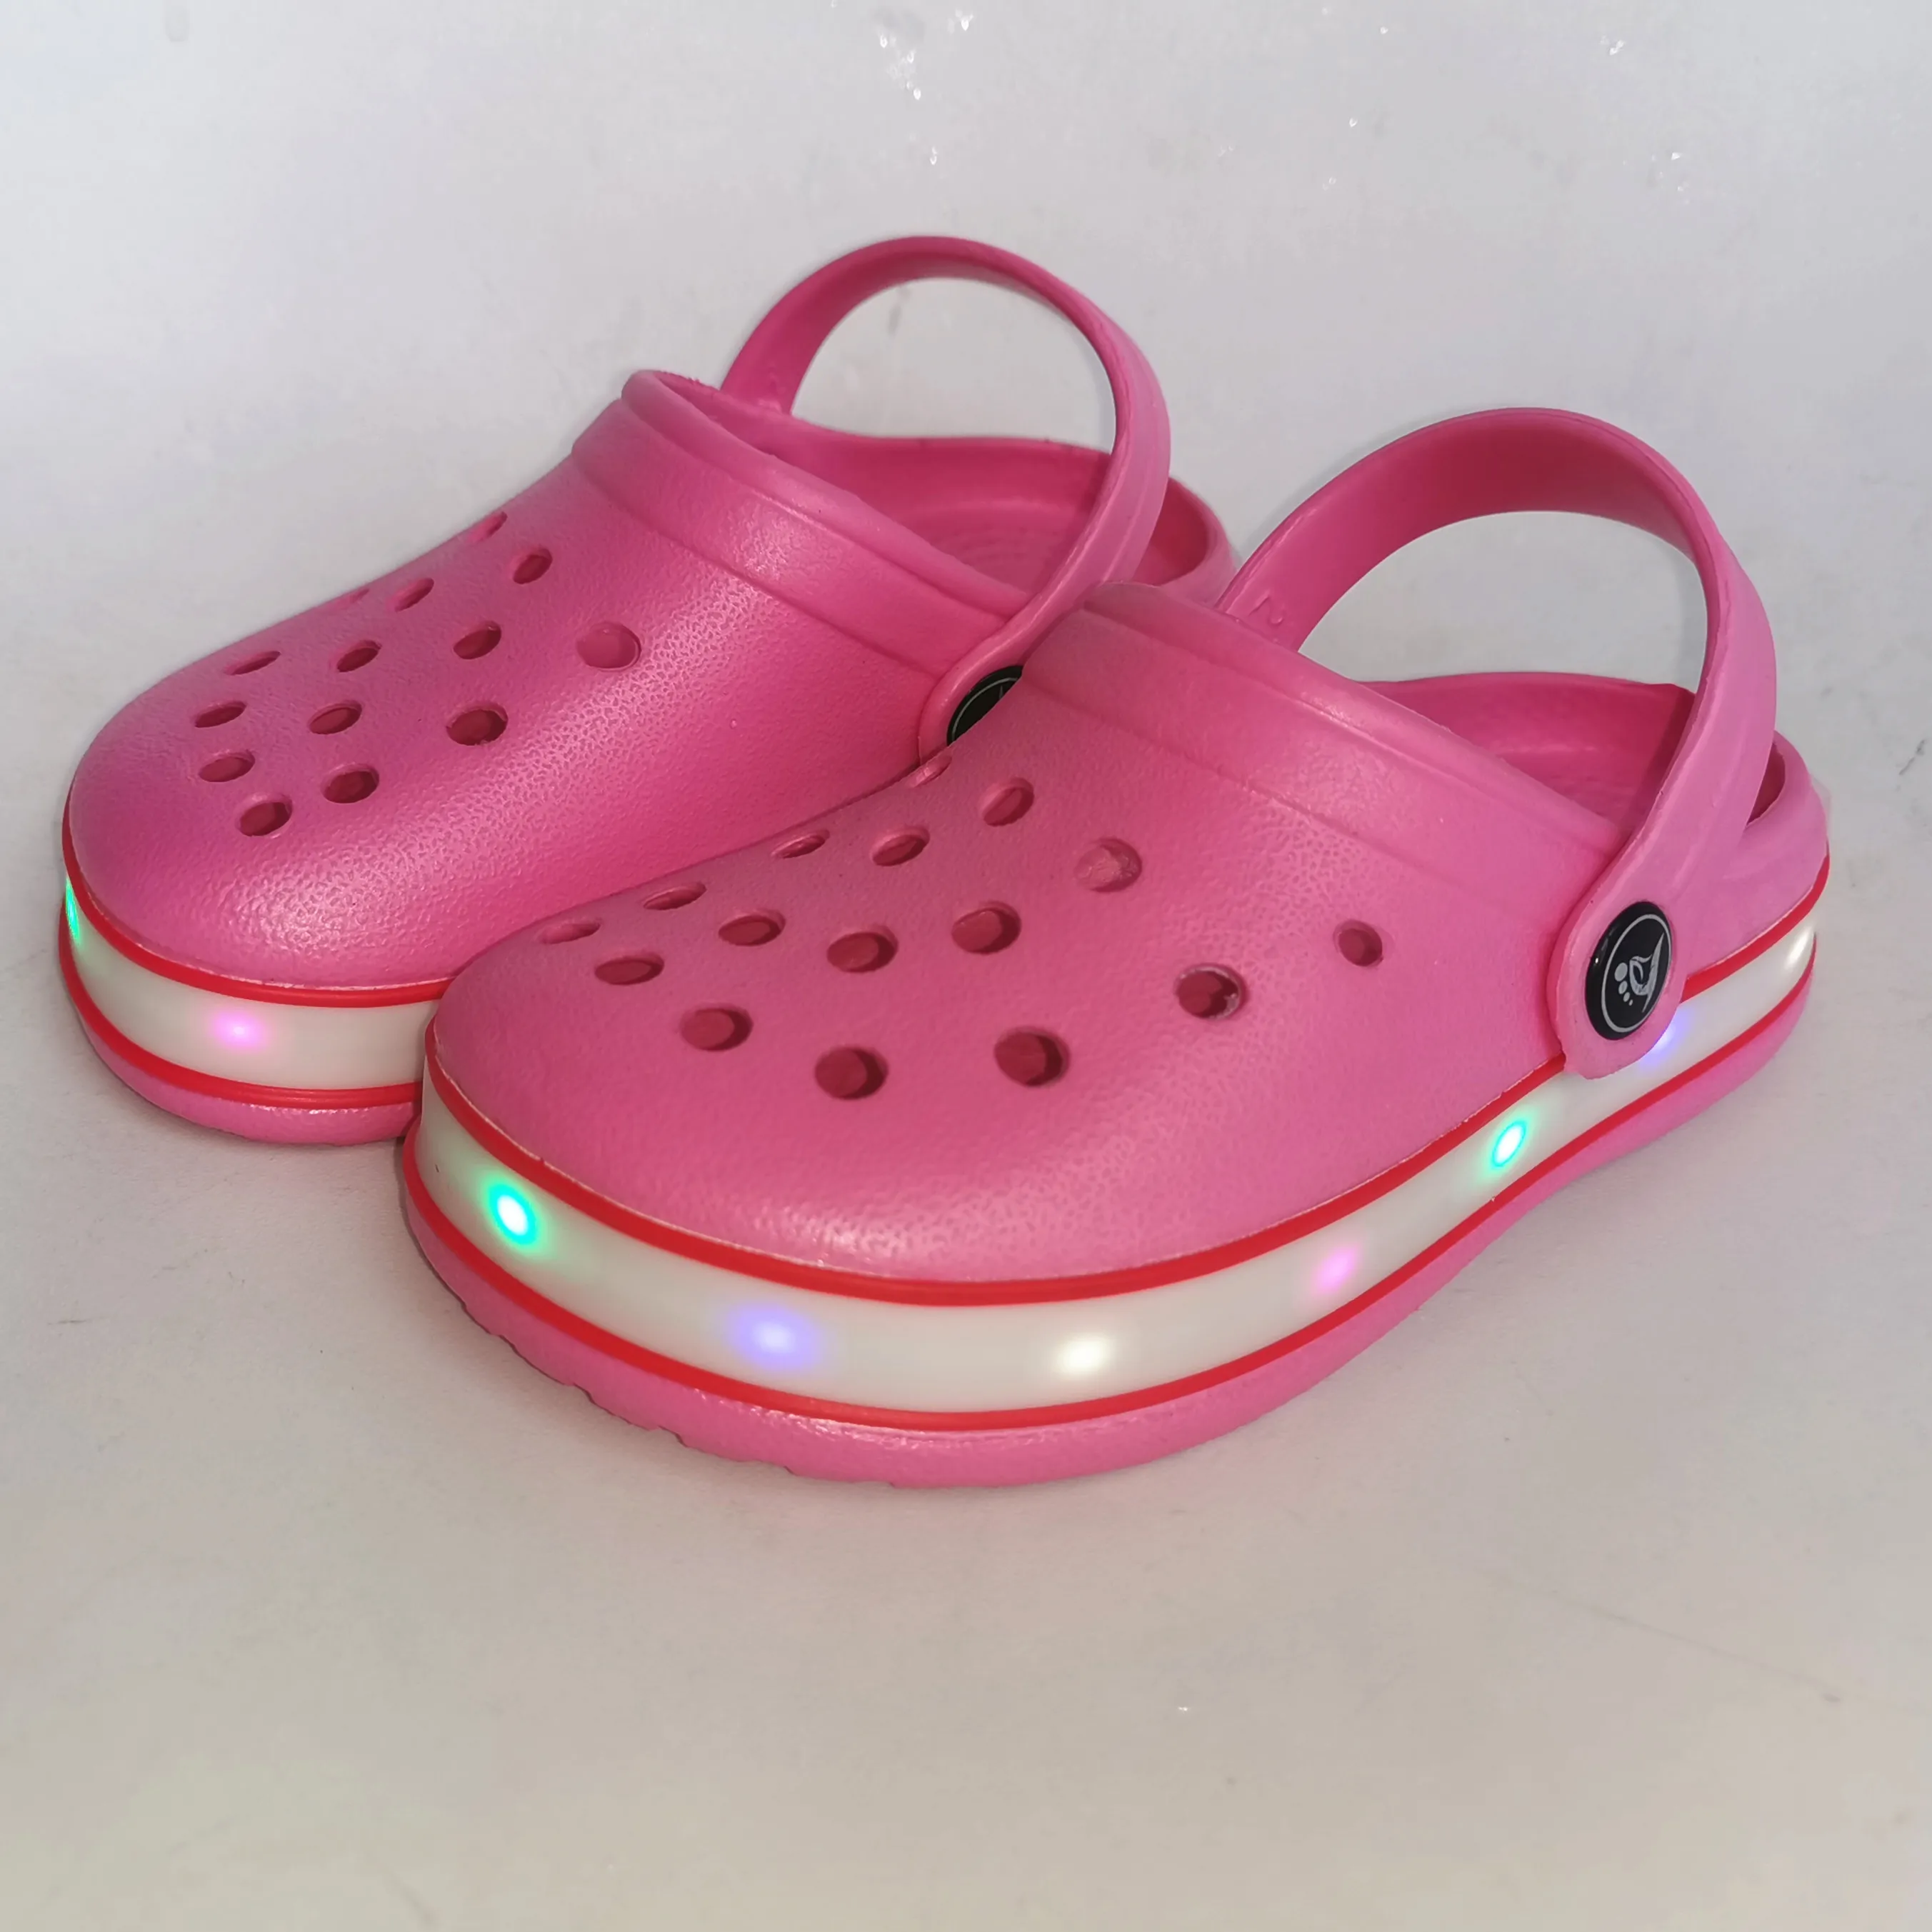 NEW KIDS GIRLS BABY NEON LED LIGHTS SLIPPERS SUMMER MULES SANDALS GARDEN CLOGS SHOES EUR SIZE25 26 26 27 28 29 30 31 32 33